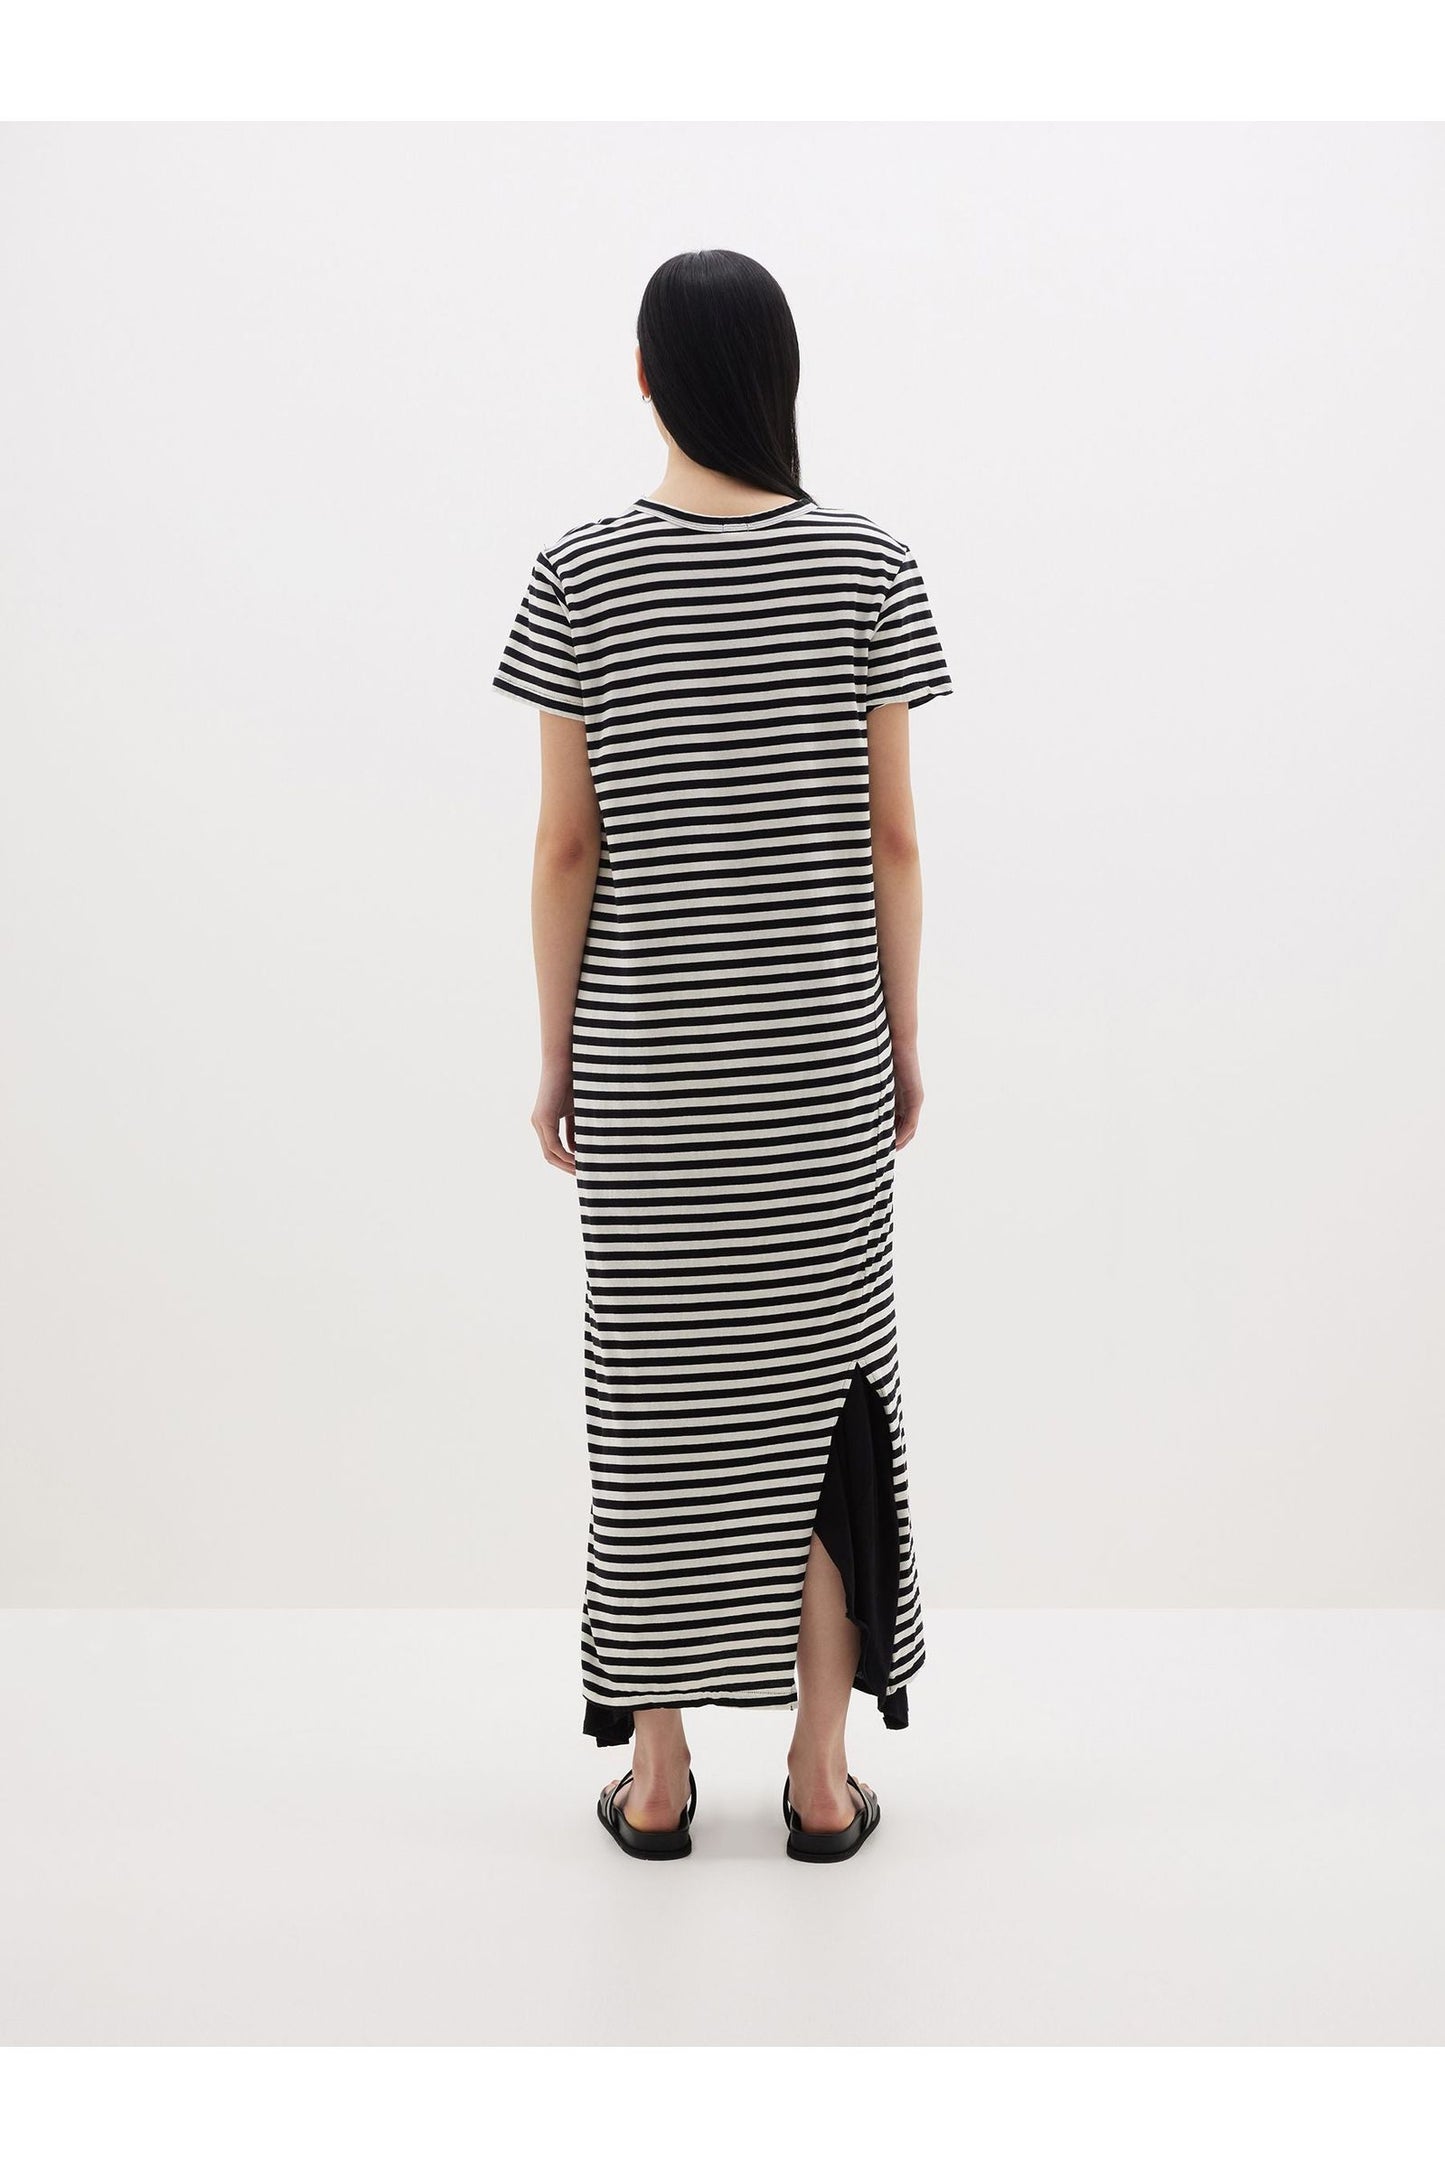 Stripe Heritage Short Sleeve T-shirt Dress in Black / Undyed by Bassike